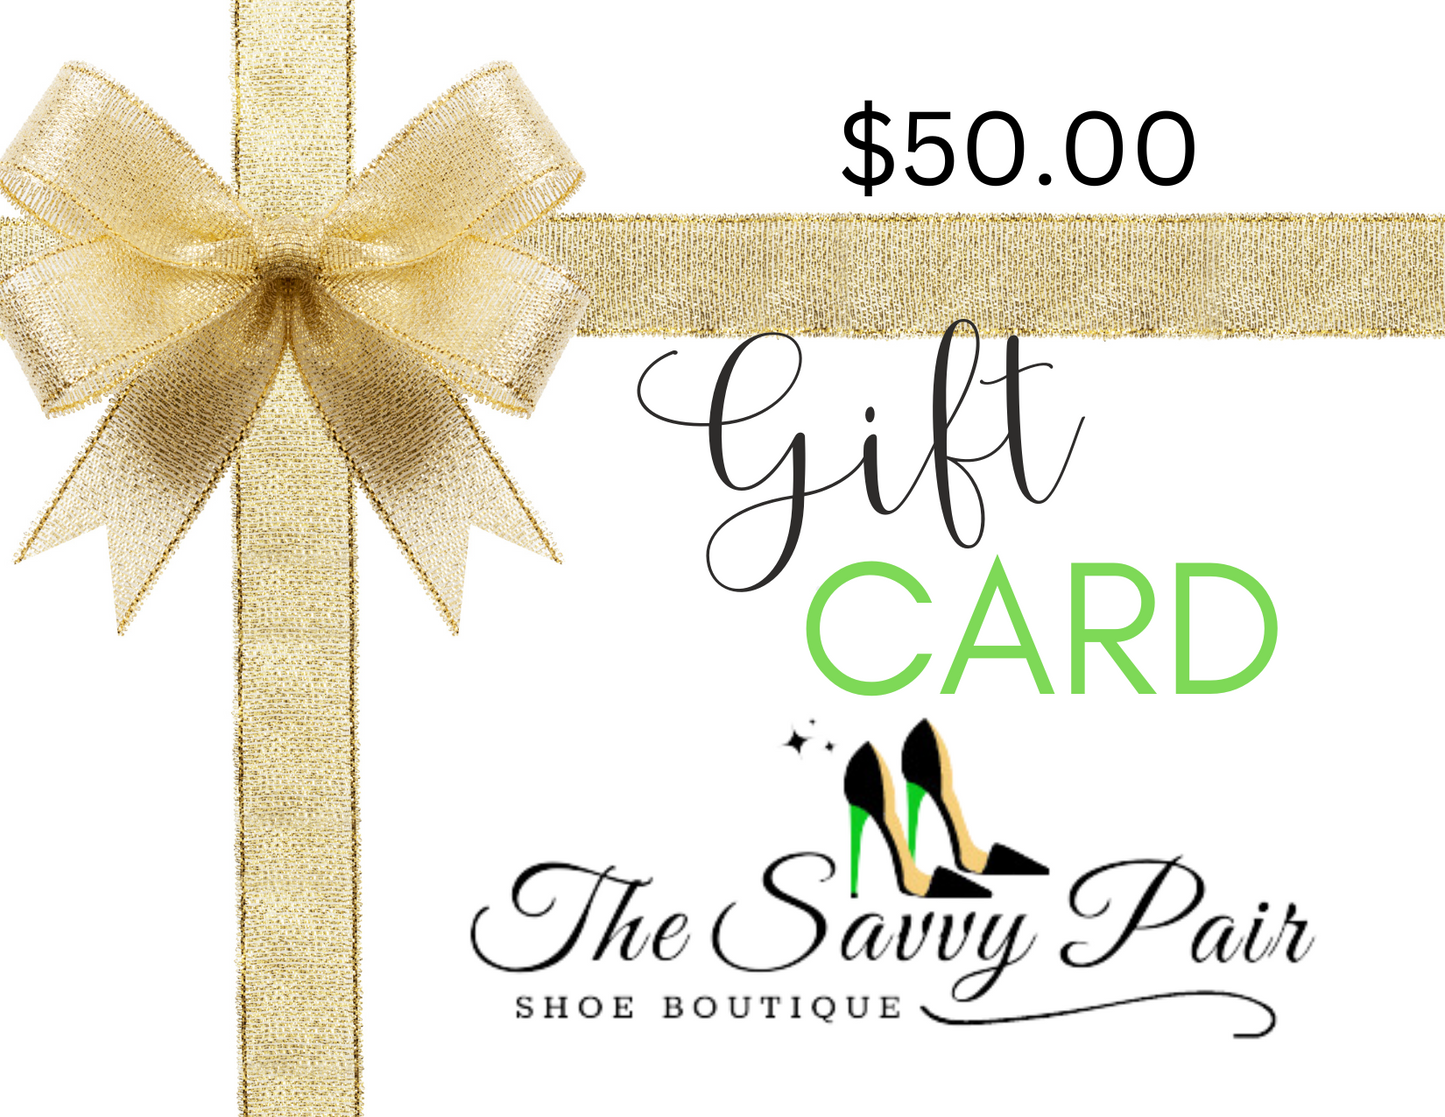 The Savvy Pair Shoe Boutique Gift Card